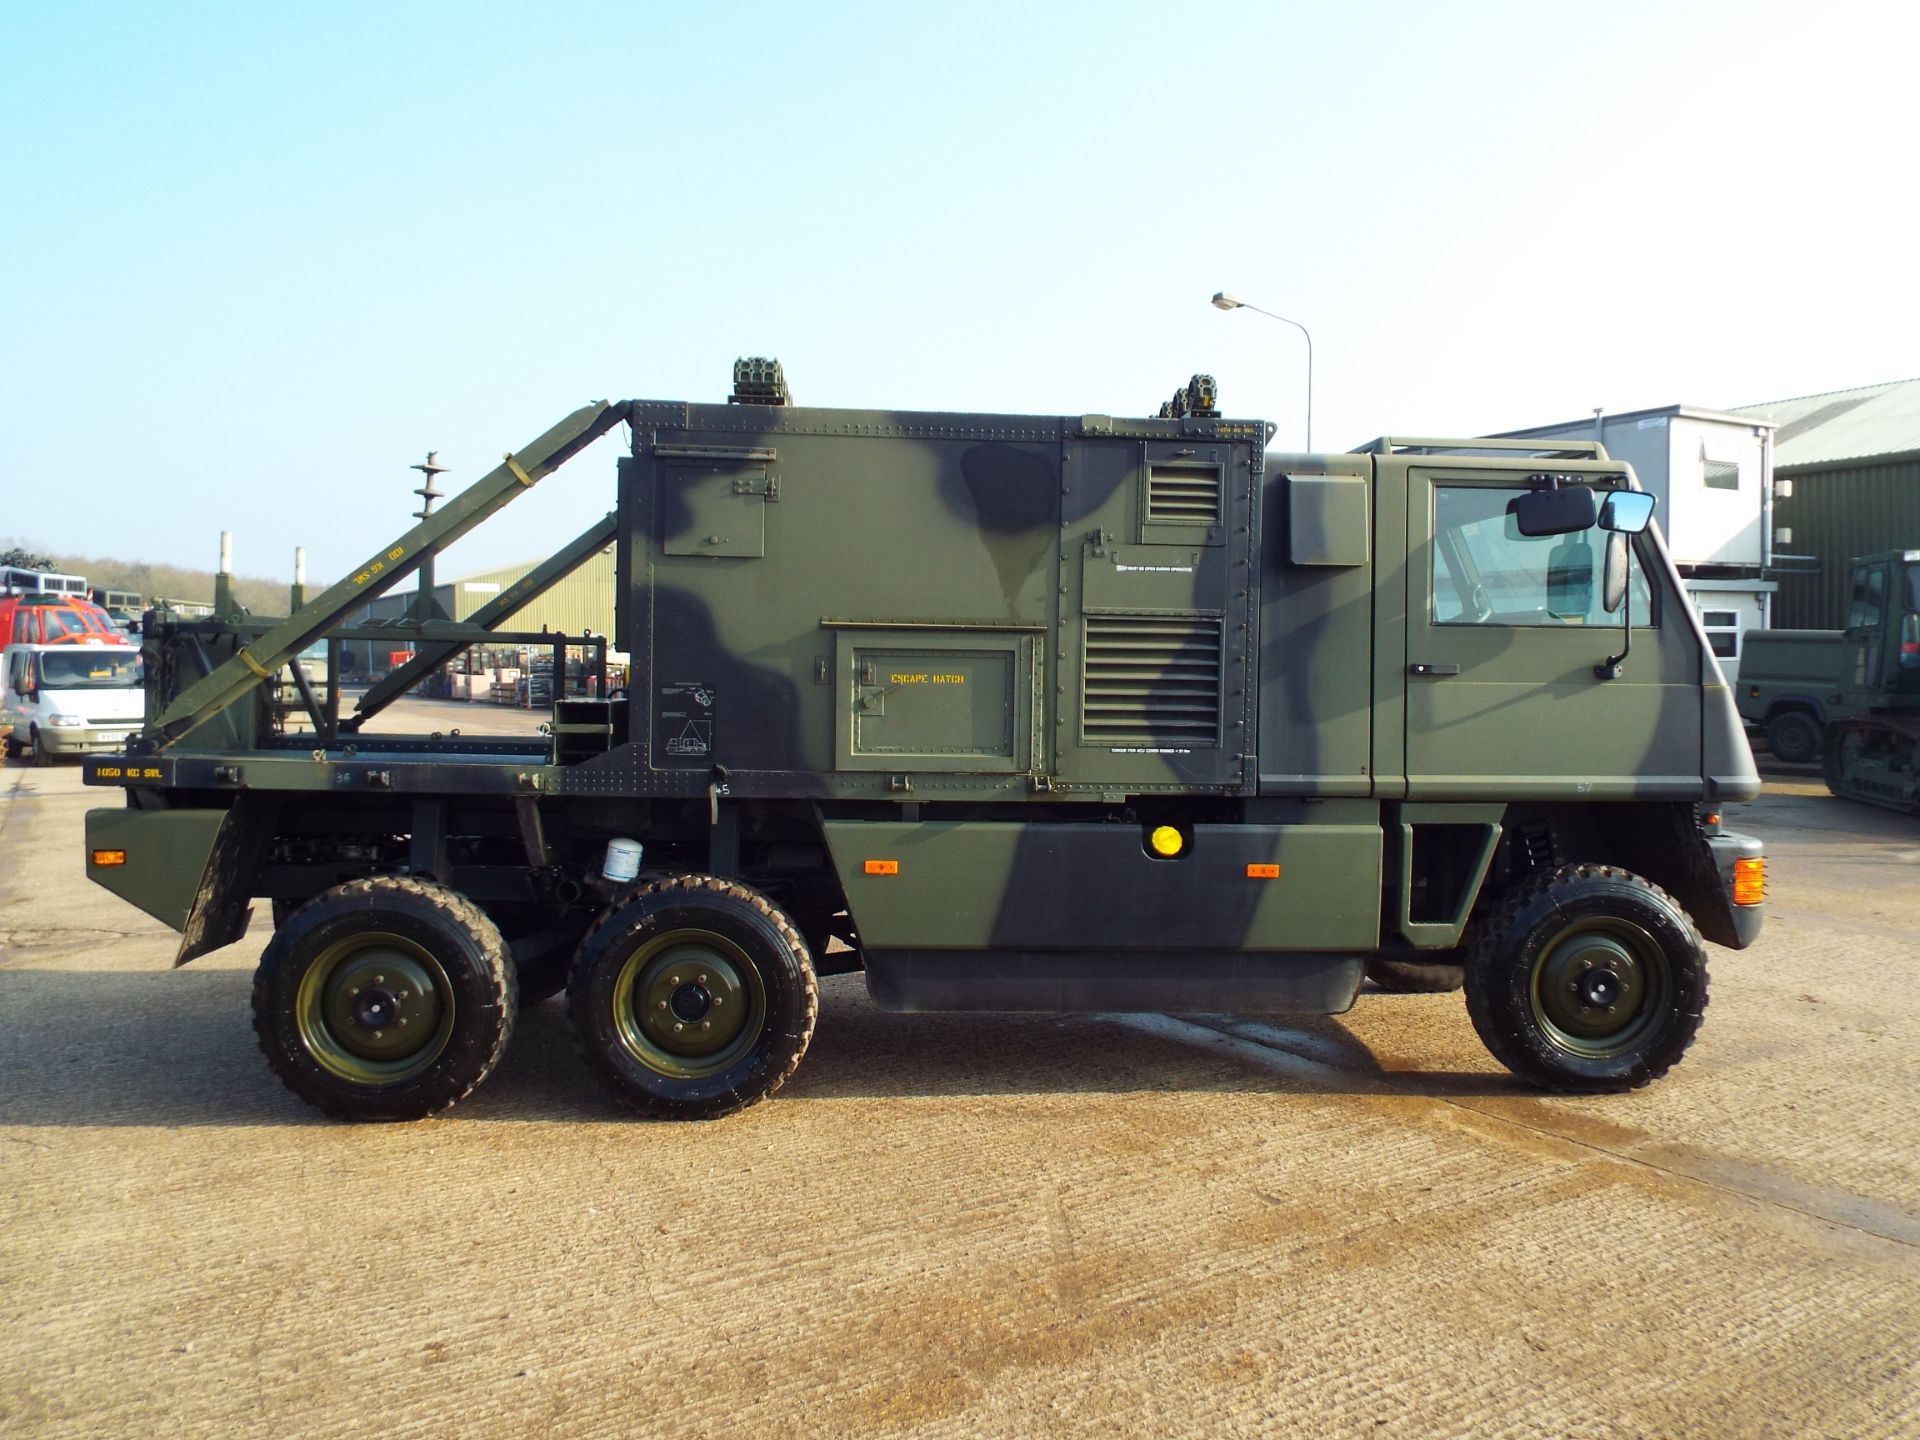 Ex Reserve Left Hand Drive Mowag Bucher Duro II 6x6 High-Mobility Tactical Vehicle - Image 8 of 31